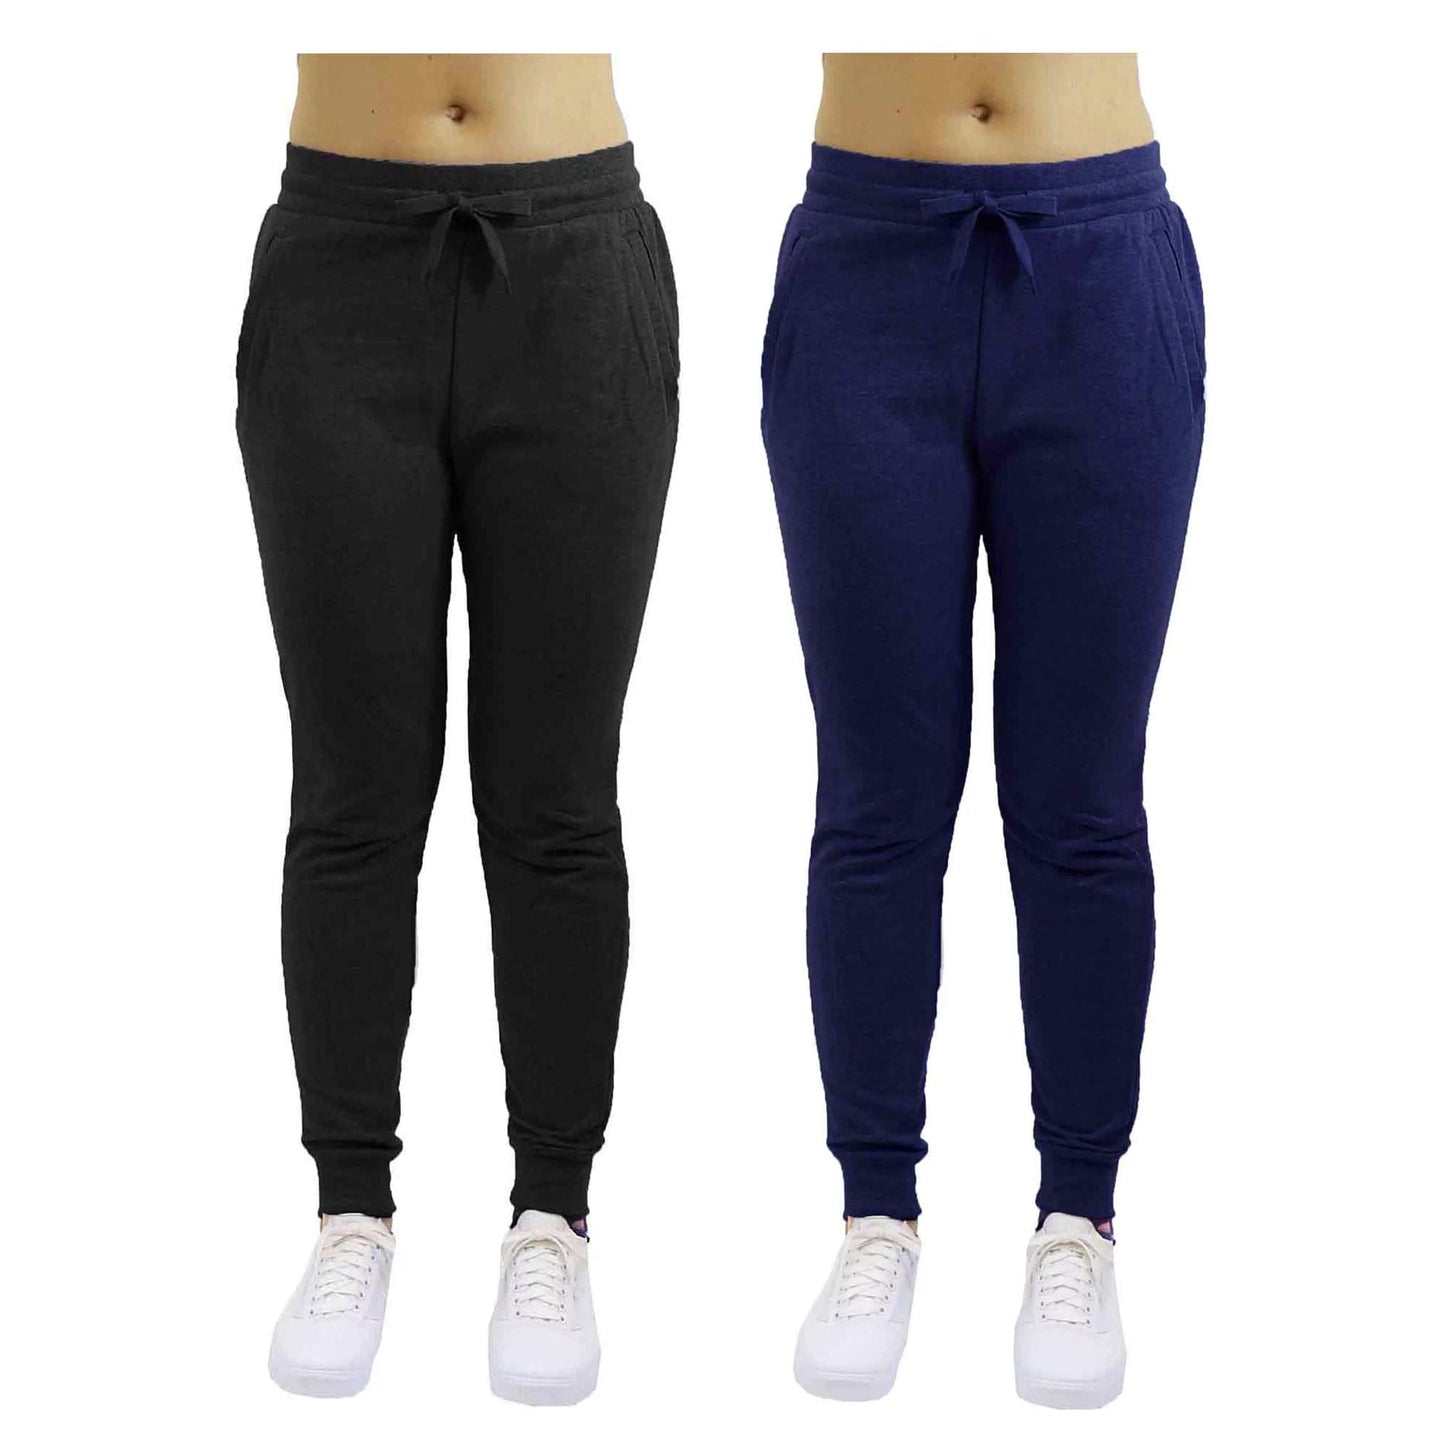 GBH Women's Slim Fit Fleece Jogger Sweatpants with Zipper Pockets 2-Pack - GalaxybyHarvic